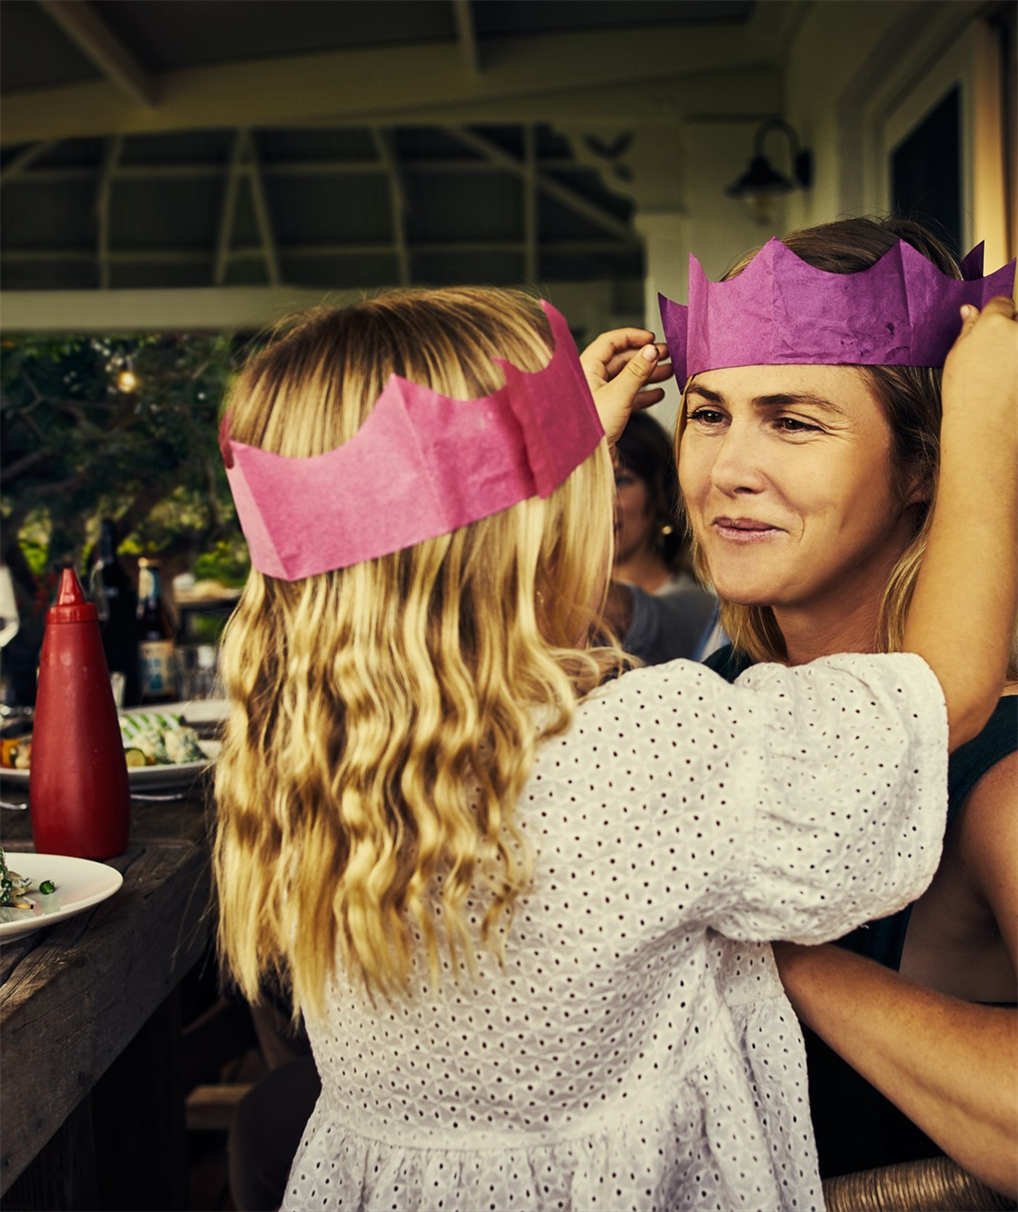 A mother and daughter wearing crowns at a party.